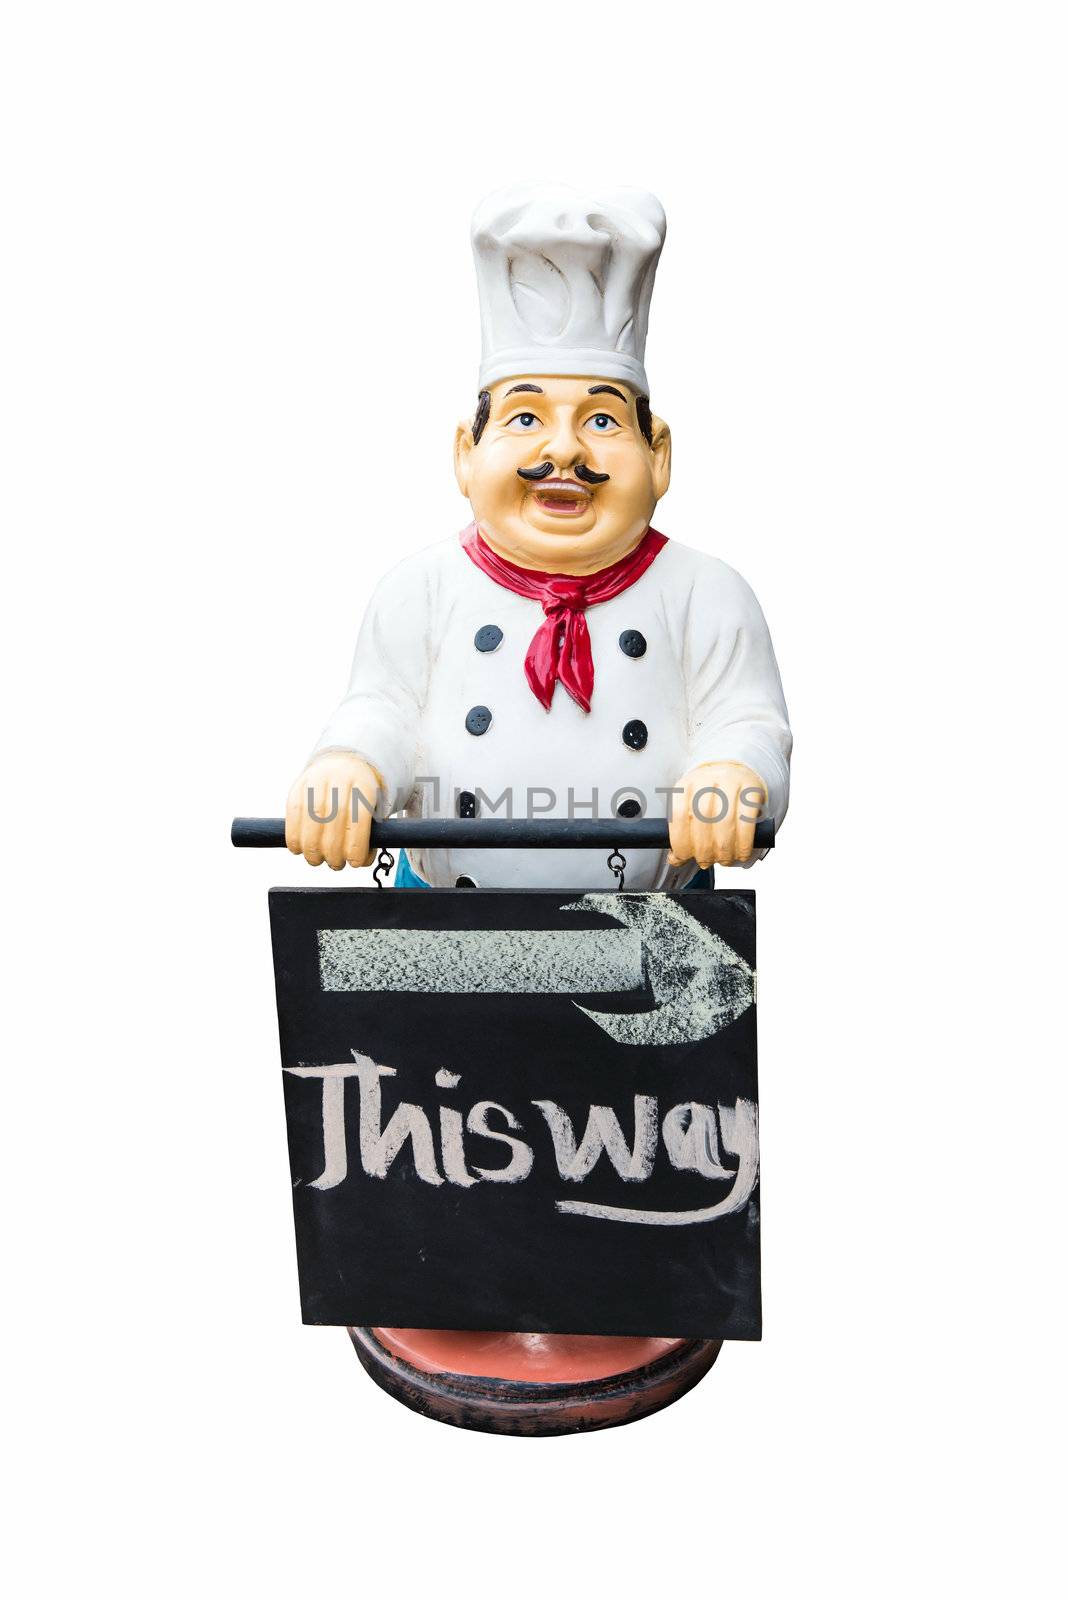 Fat plastic male chef doll holding a sign by sasilsolutions